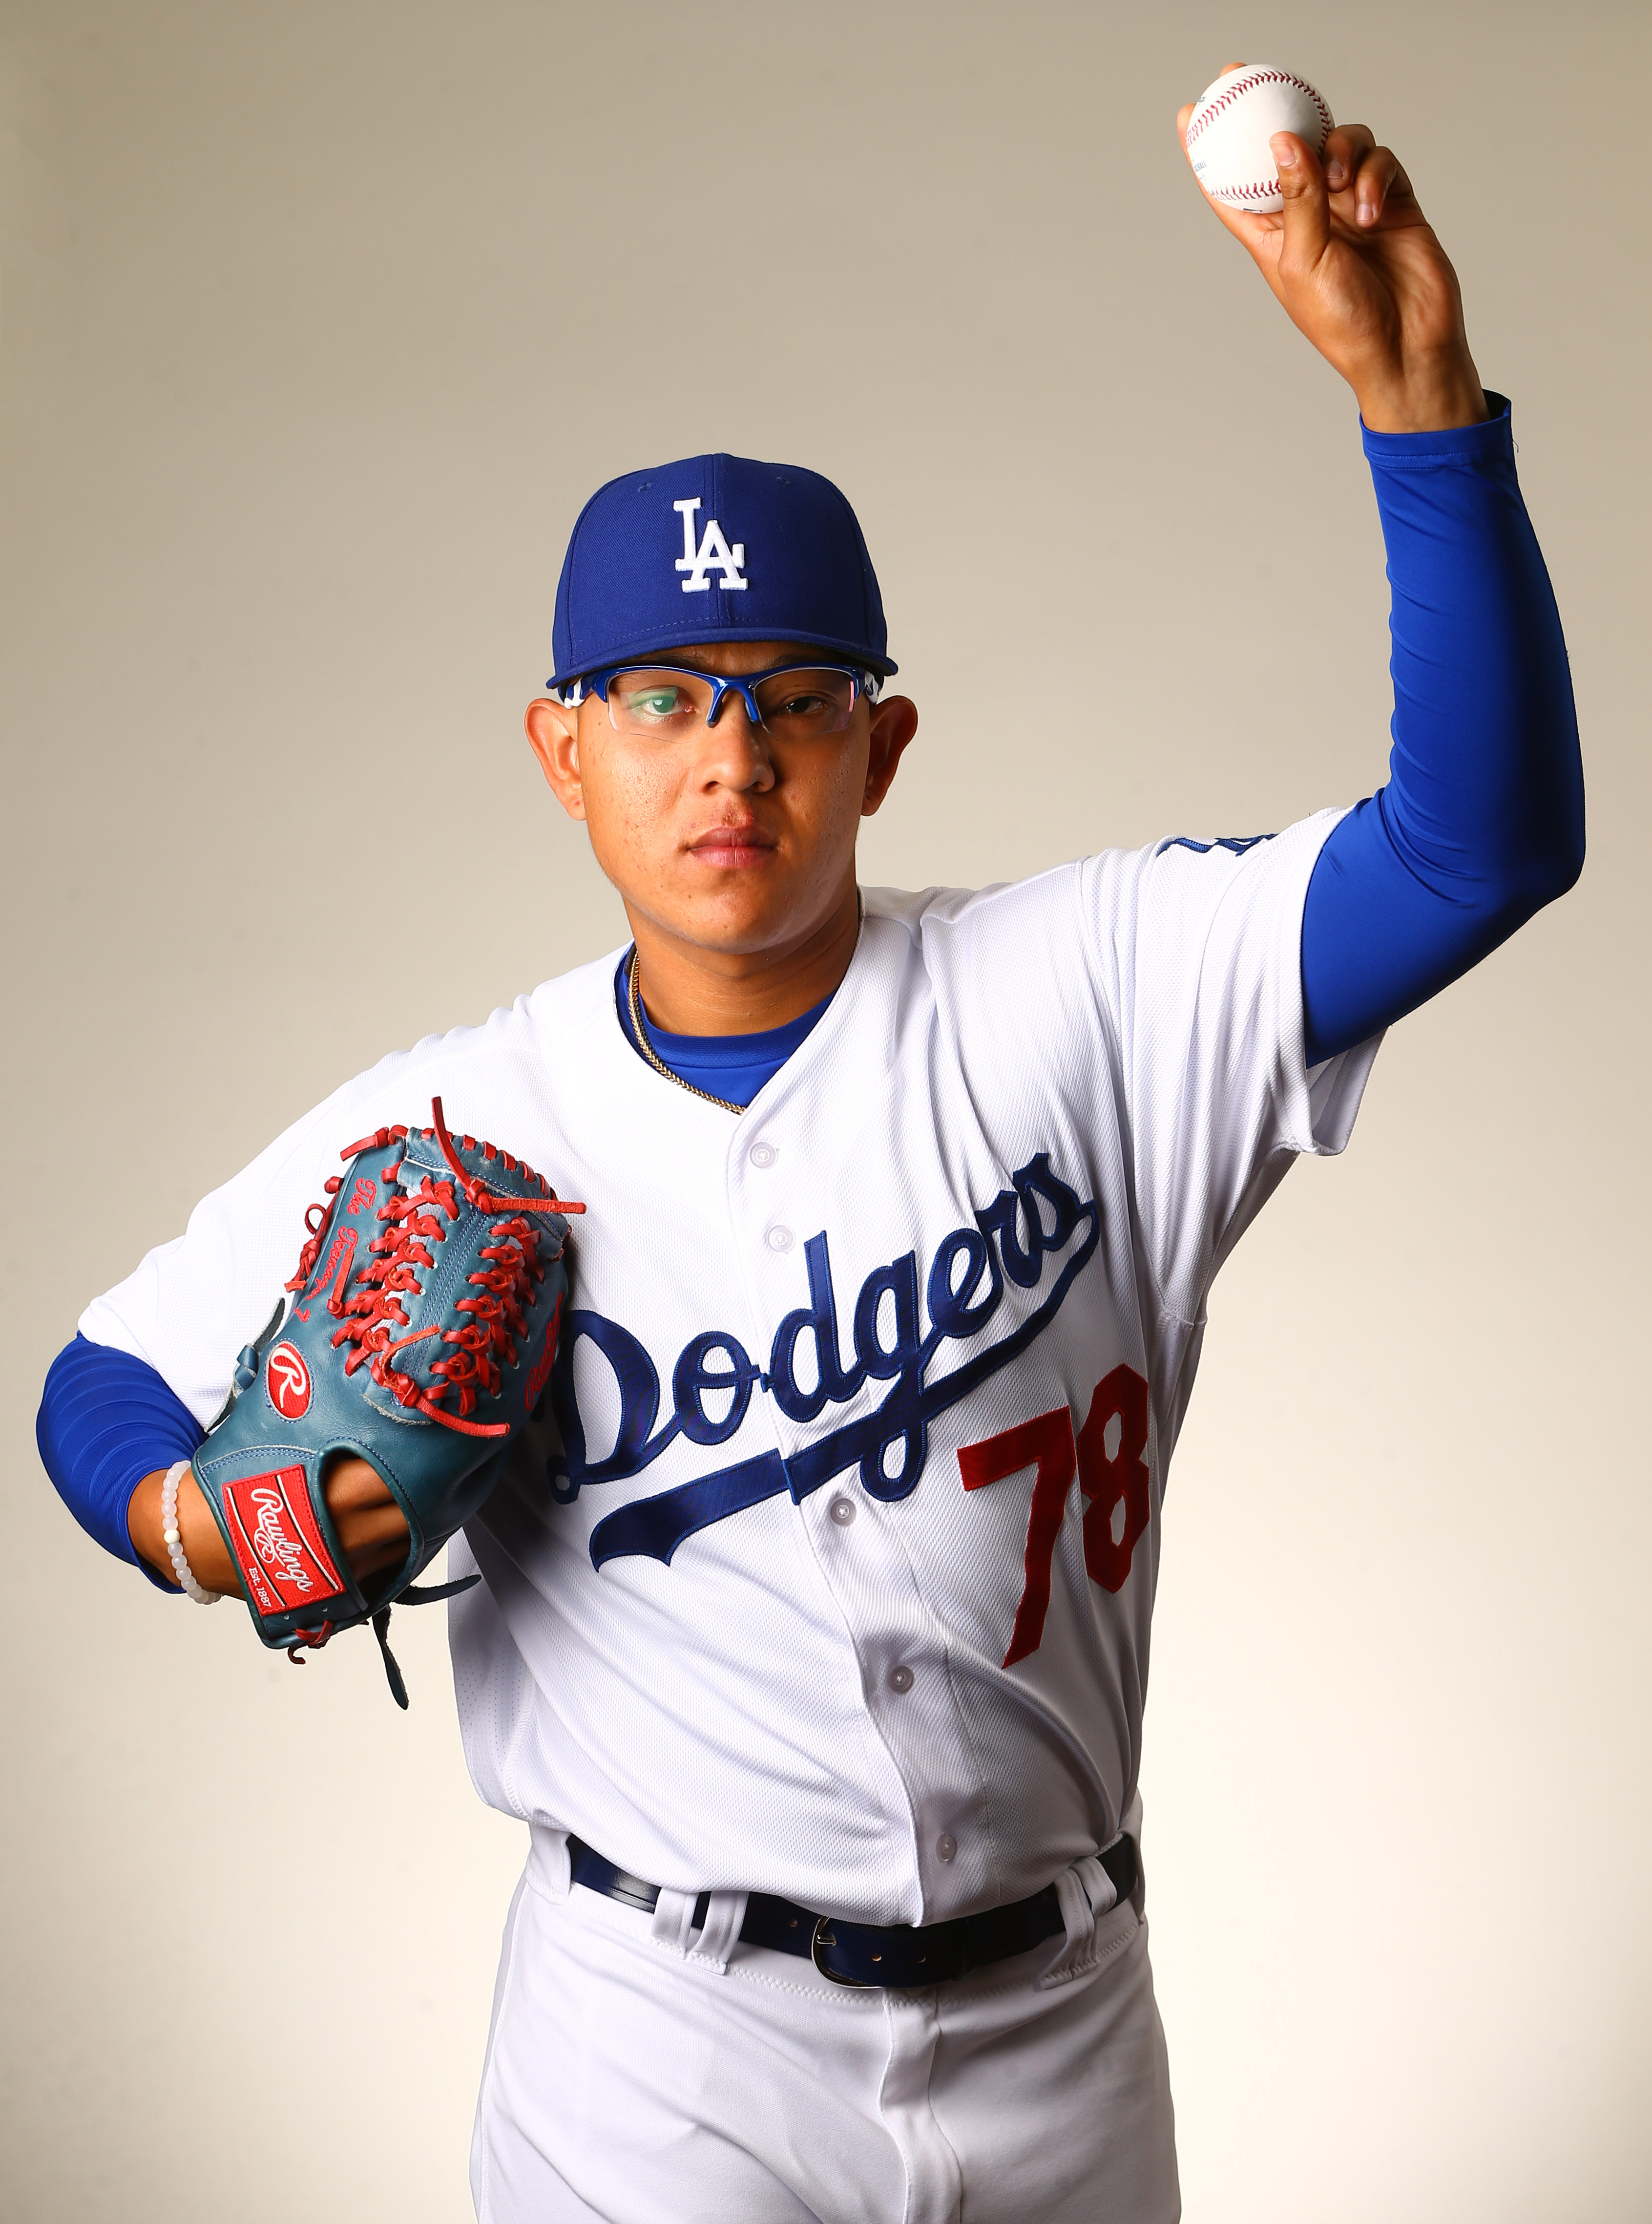 Dodgers take another step in regards to Julio Urias' future